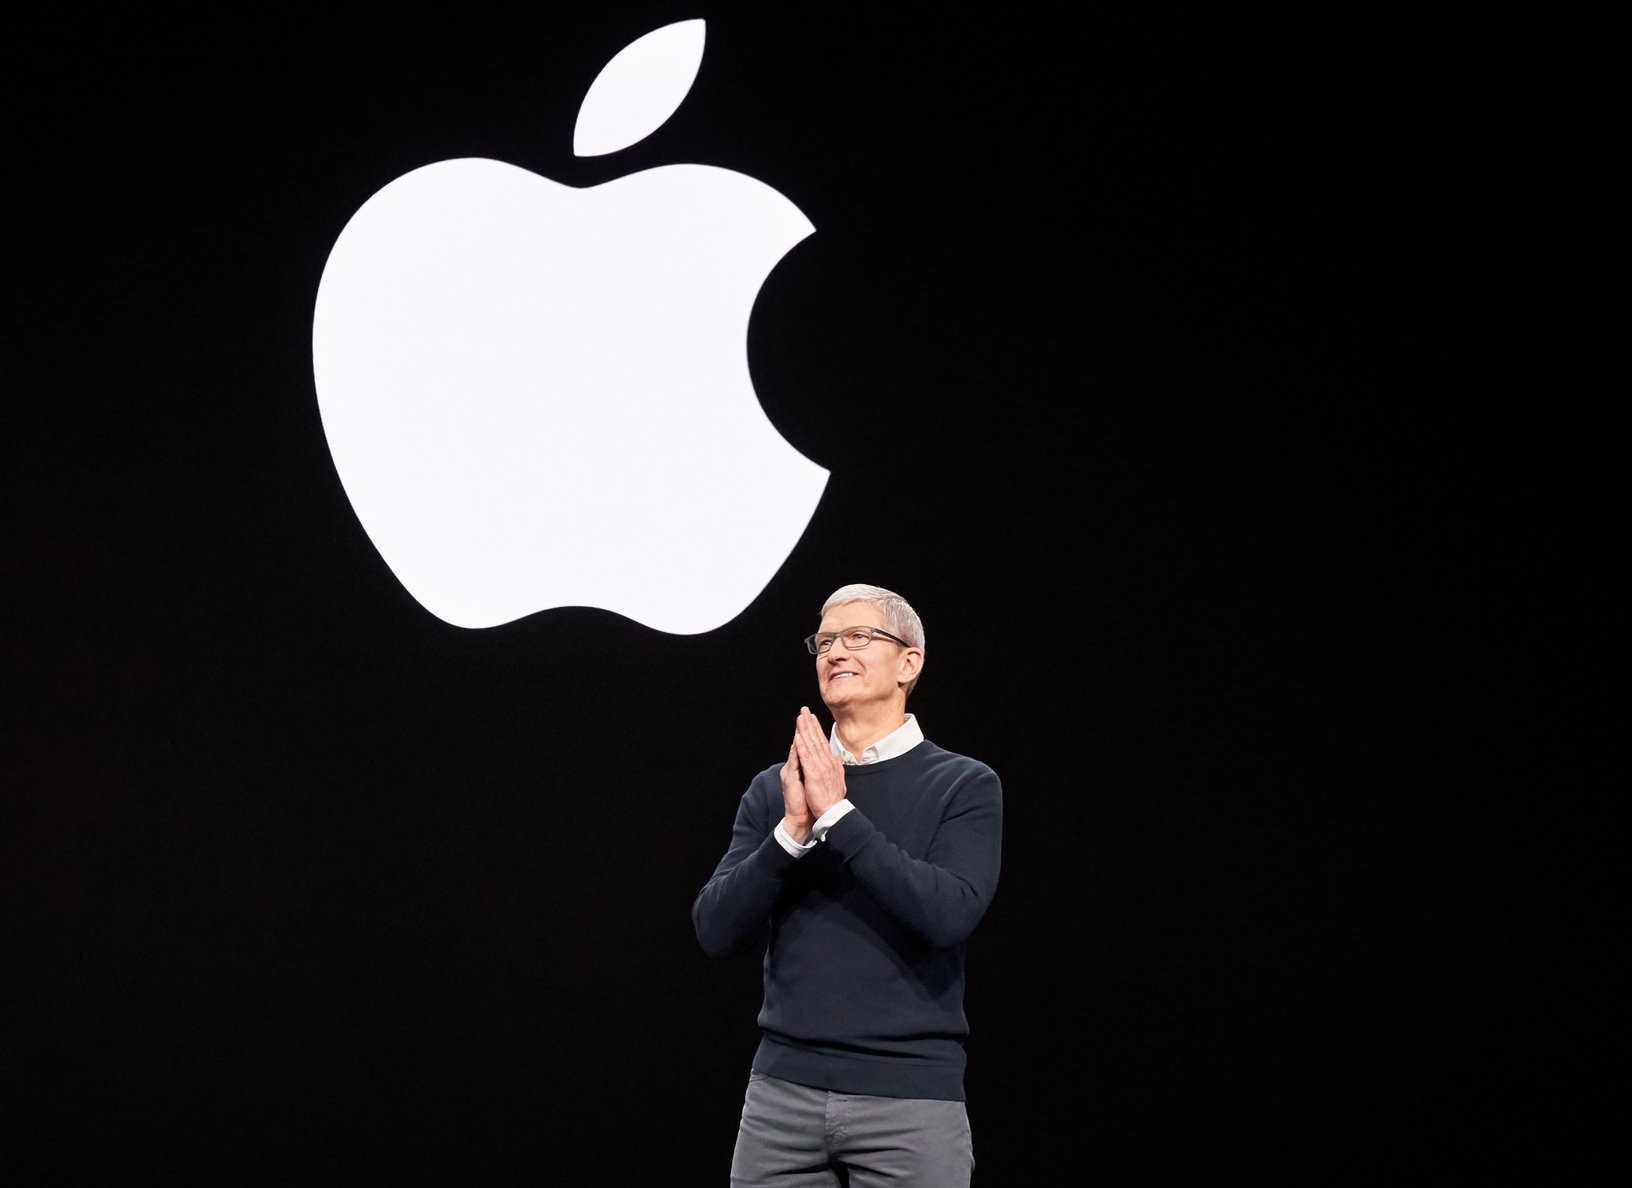 https://www.imore.com/sites/imore.com/files/styles/large/public/field/image/2019/11/apples-keynote-event_tim_cook-03252019.jpg?itok=H4FNQlIY